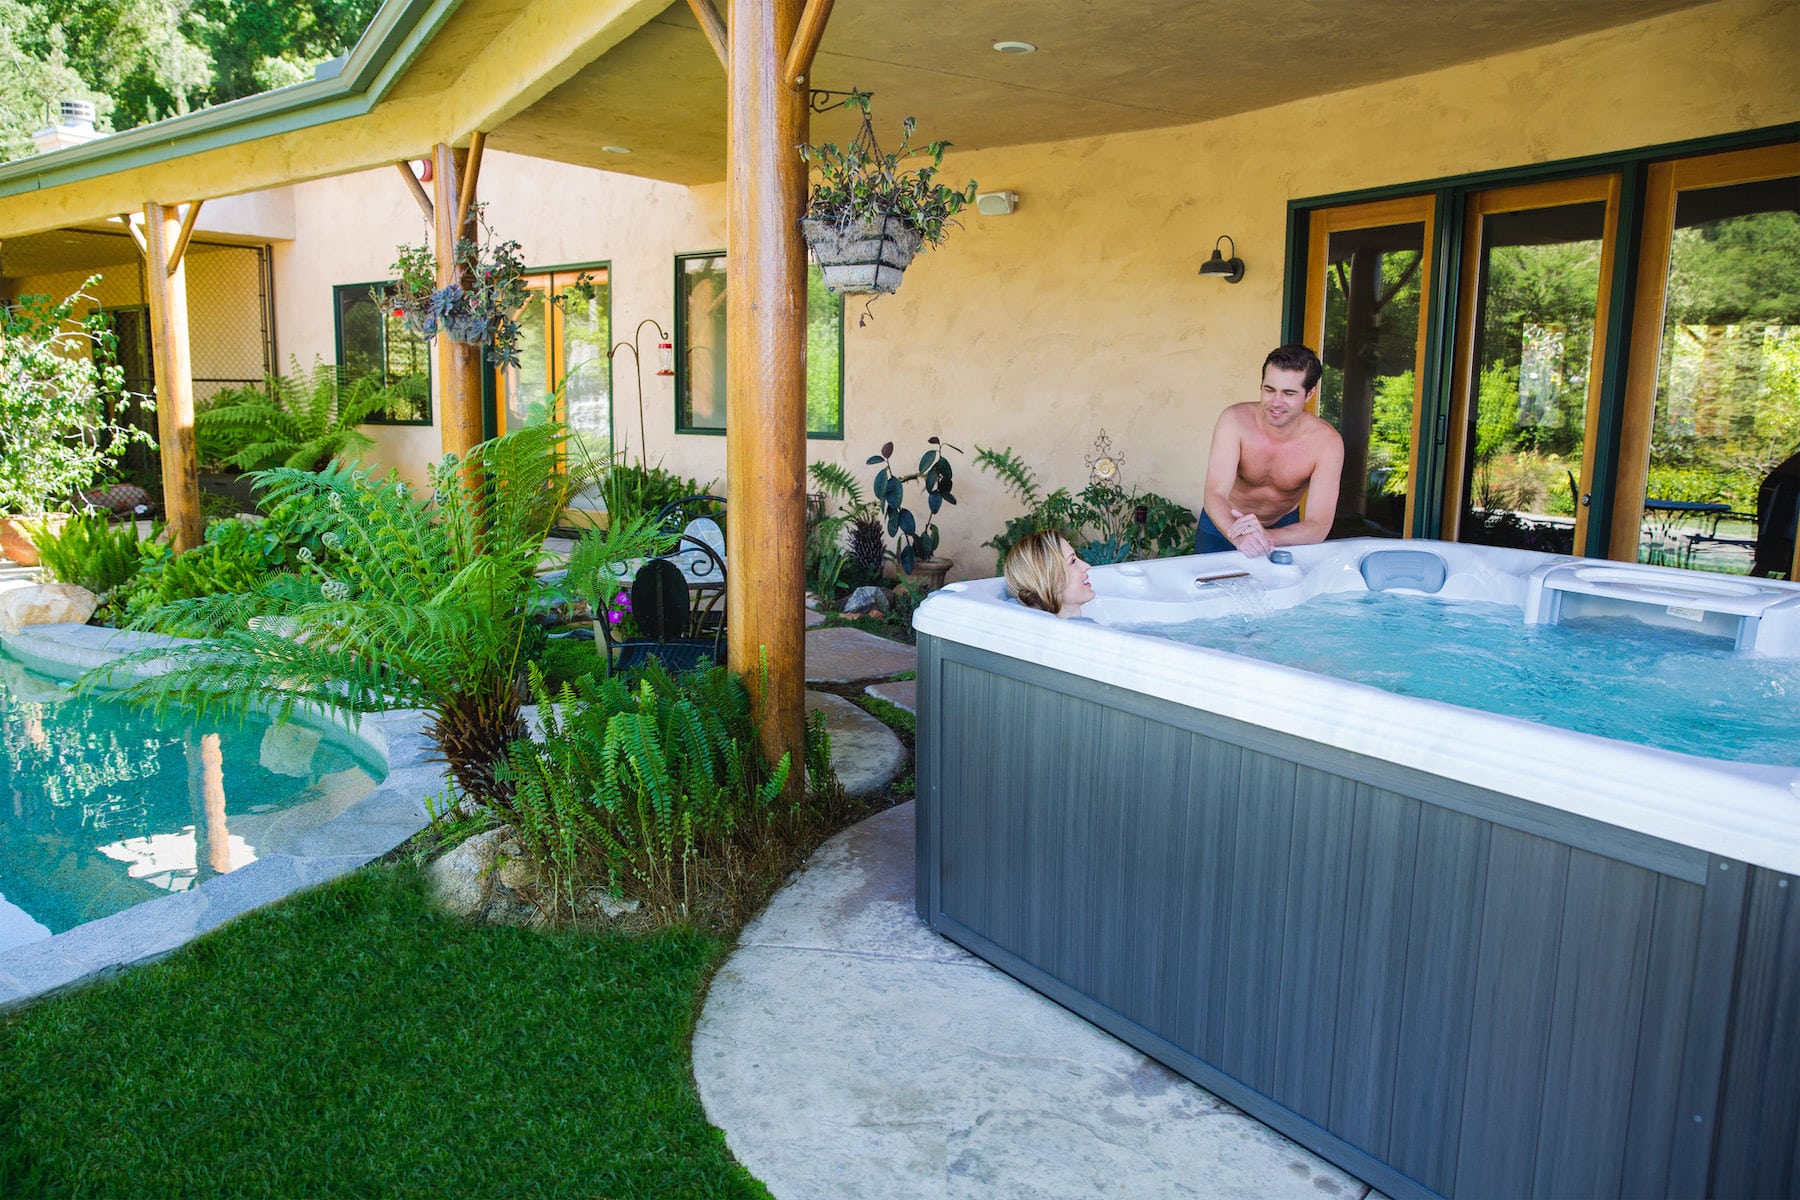 How a Hot Tub Can Help to Ease Aches & Pains